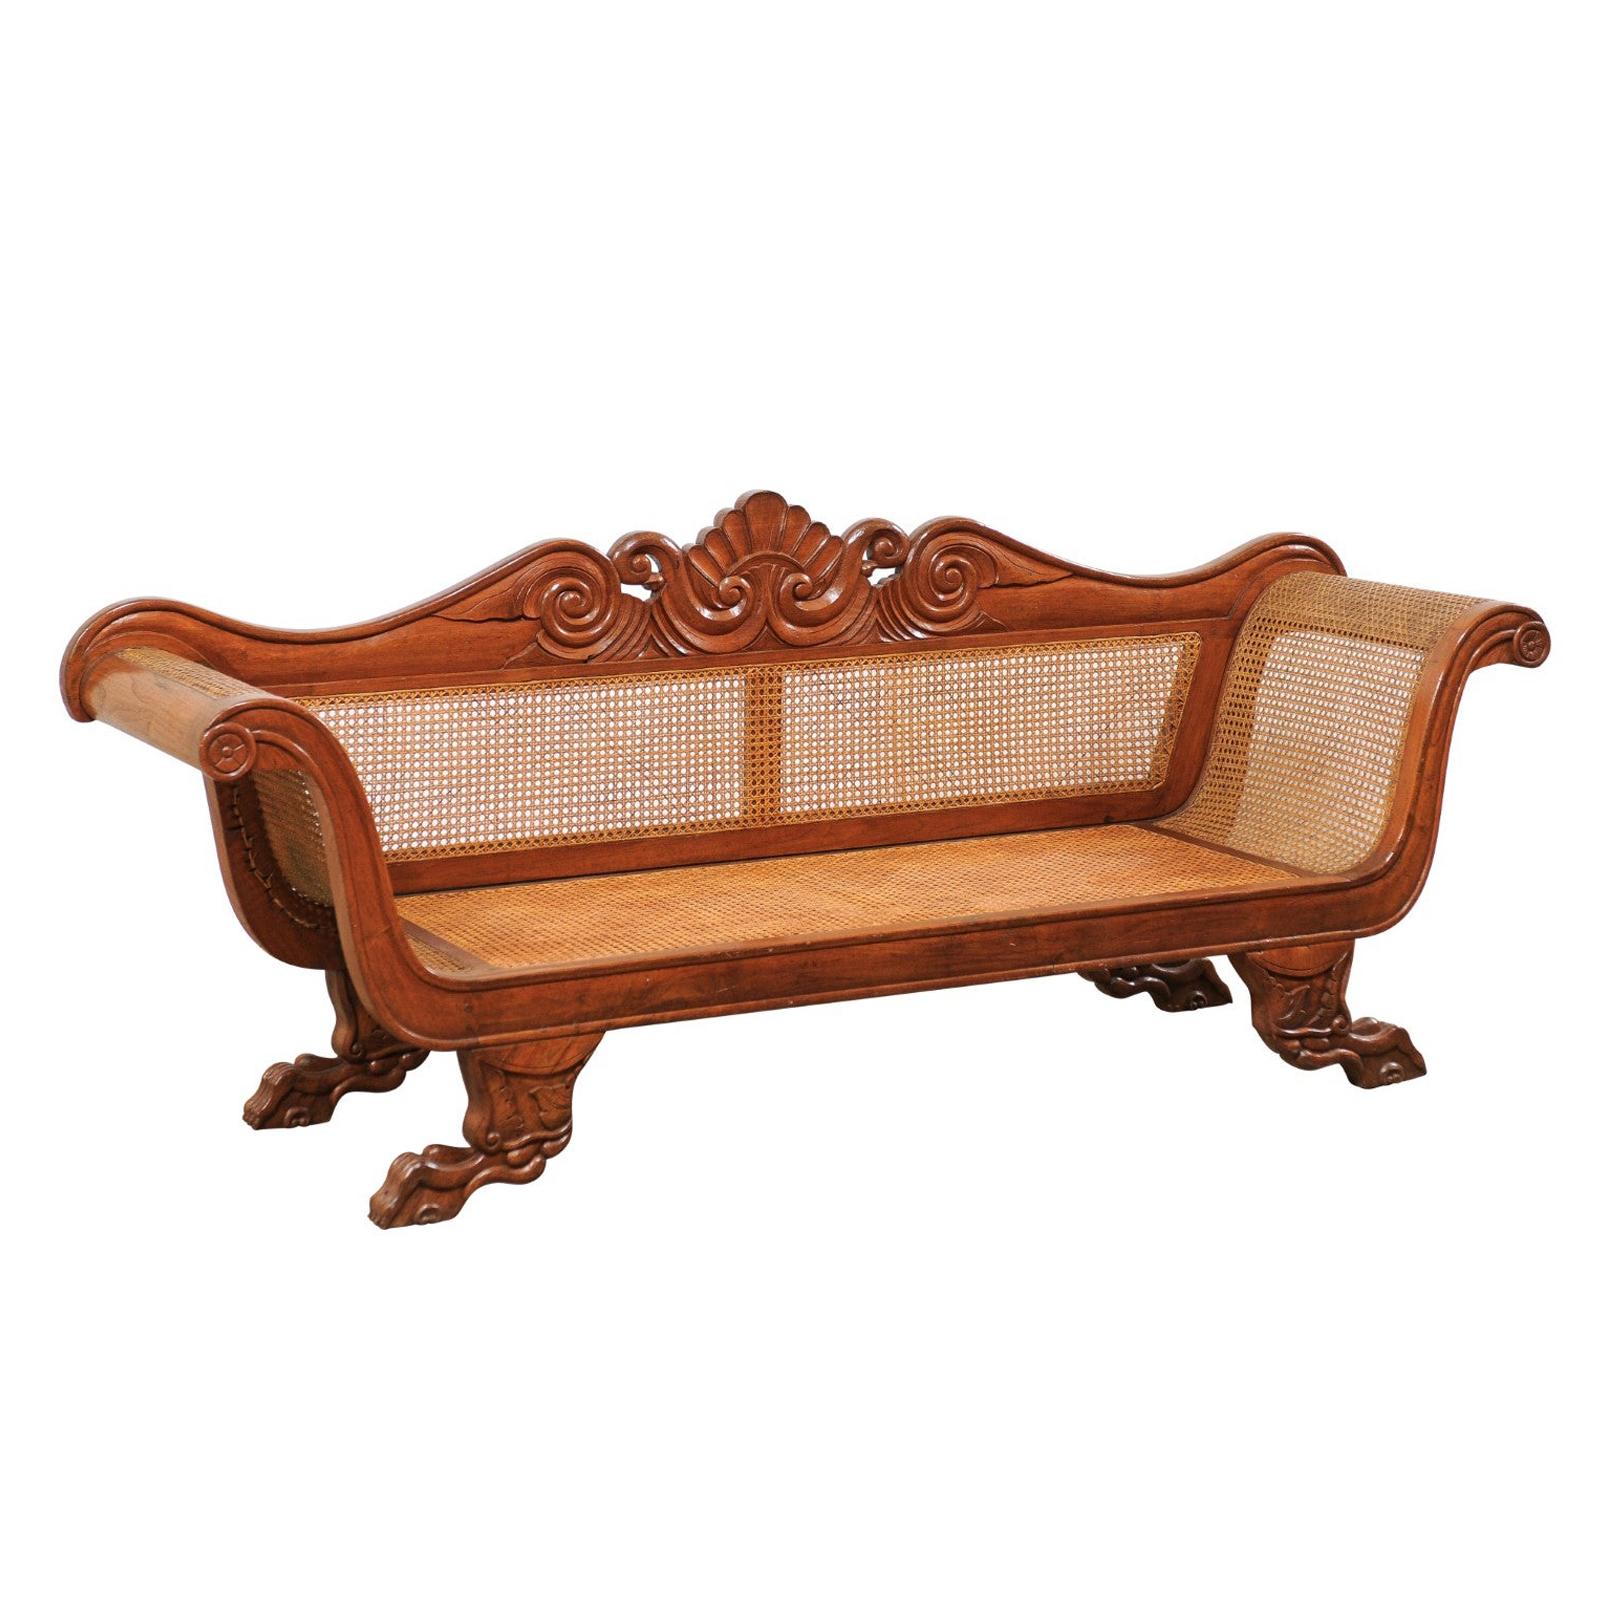 Antique Caribbean Regency Carved Wood and Hand Caned Sofa w/ Shell & Wave Crest For Sale